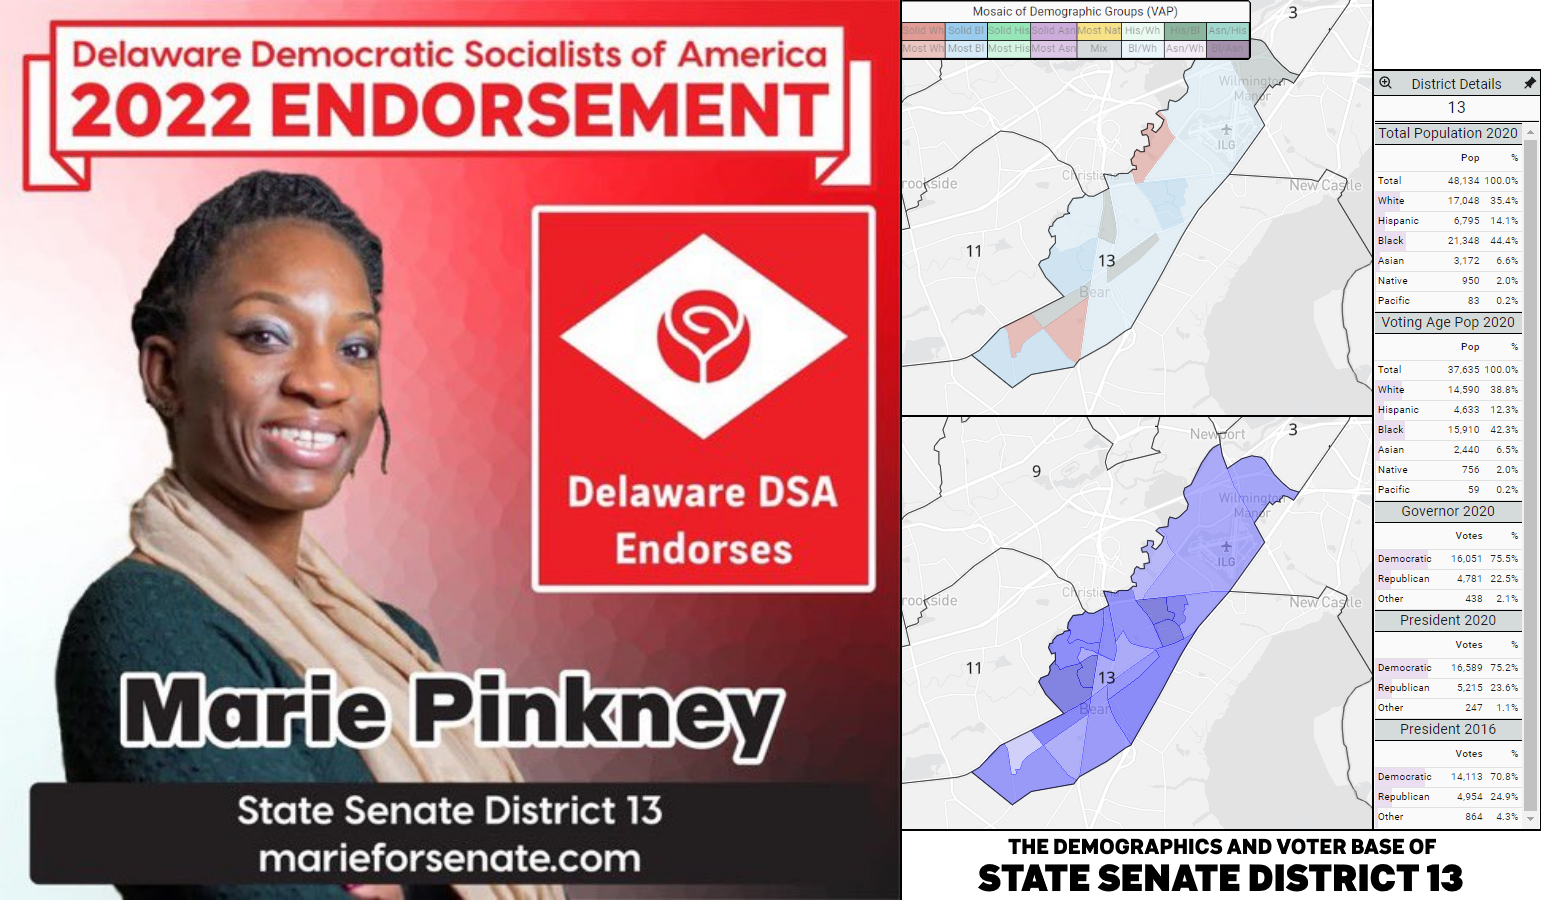 Marie Pinkney's endorsement graphic (she/her; left) and a graphic of the demographics and voting base of Senate District 13 (right).